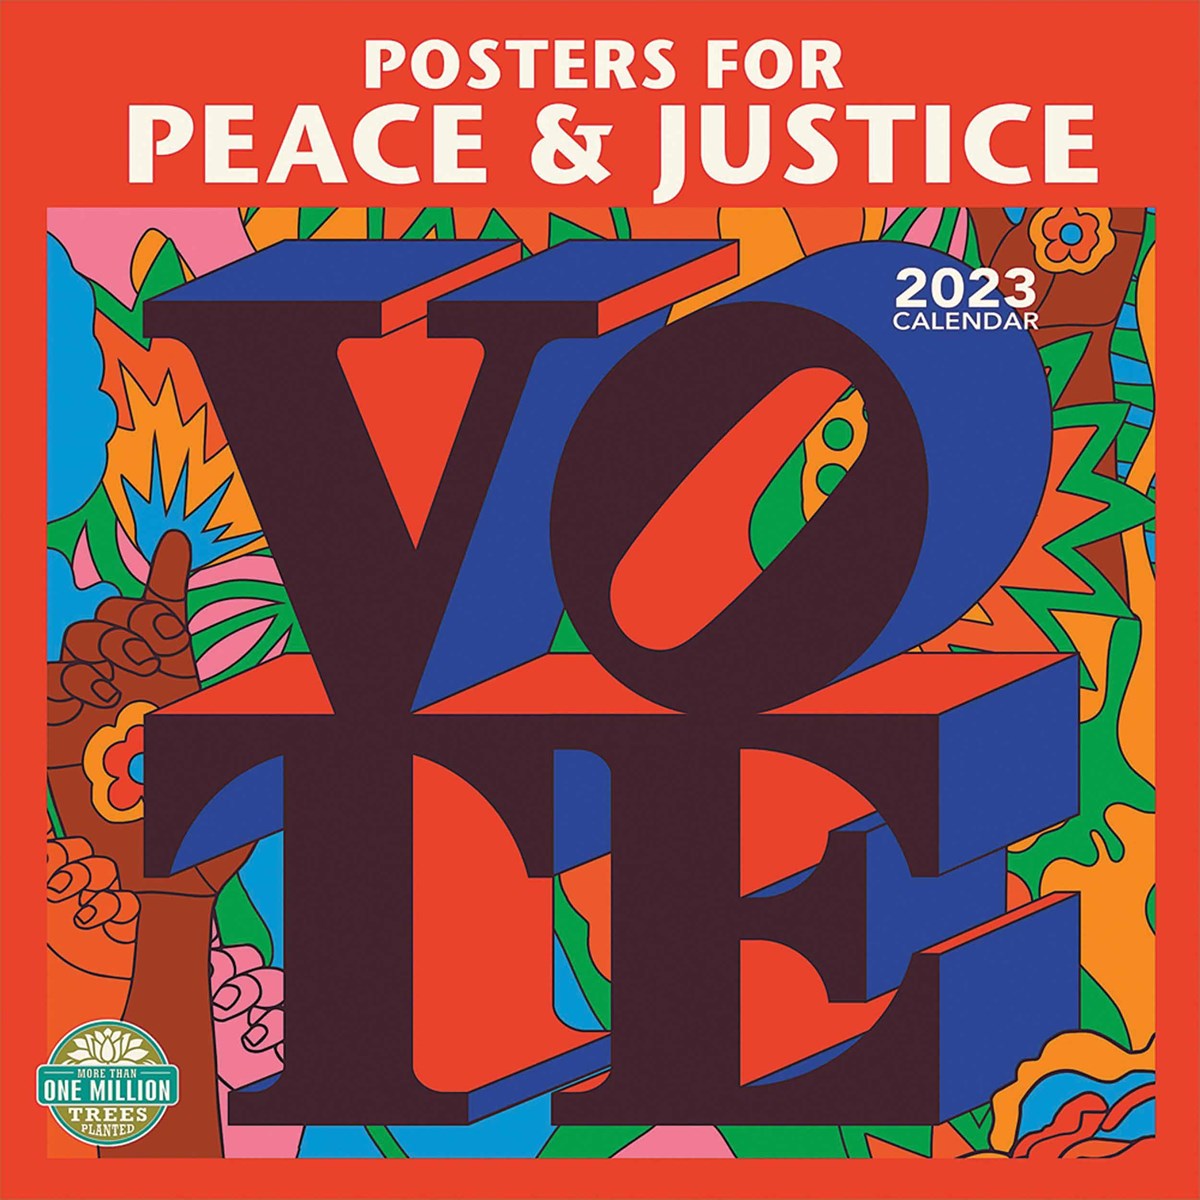 Posters for Peace & Justice 2023 Calendars